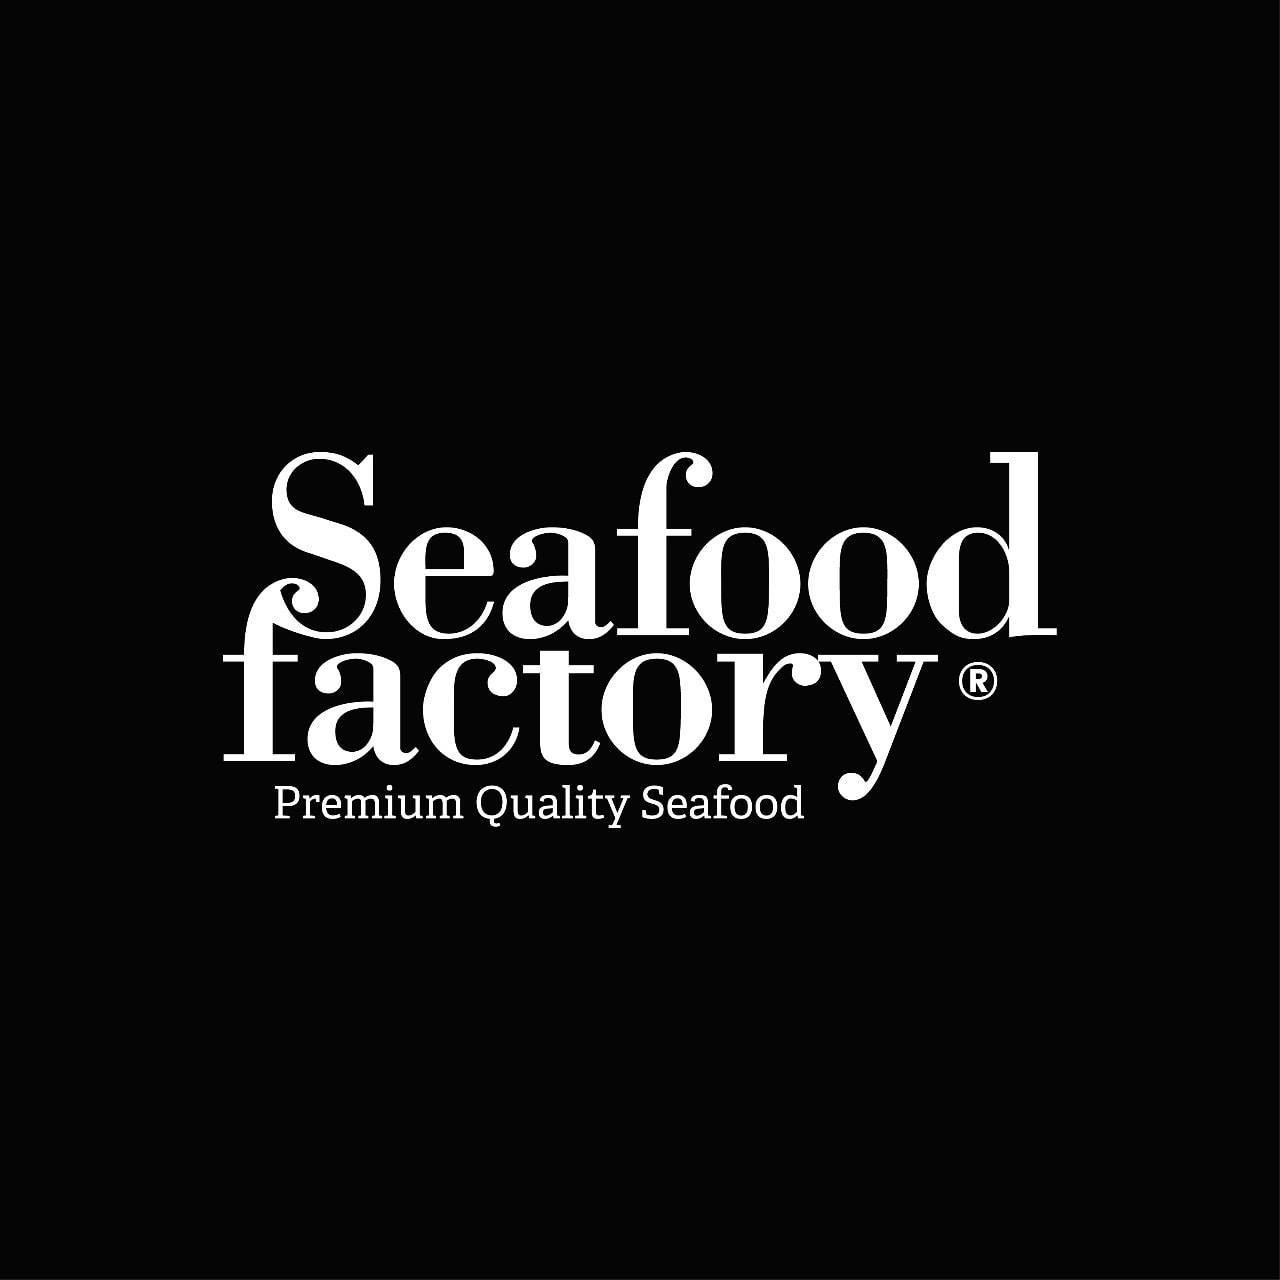 Seafood Factory